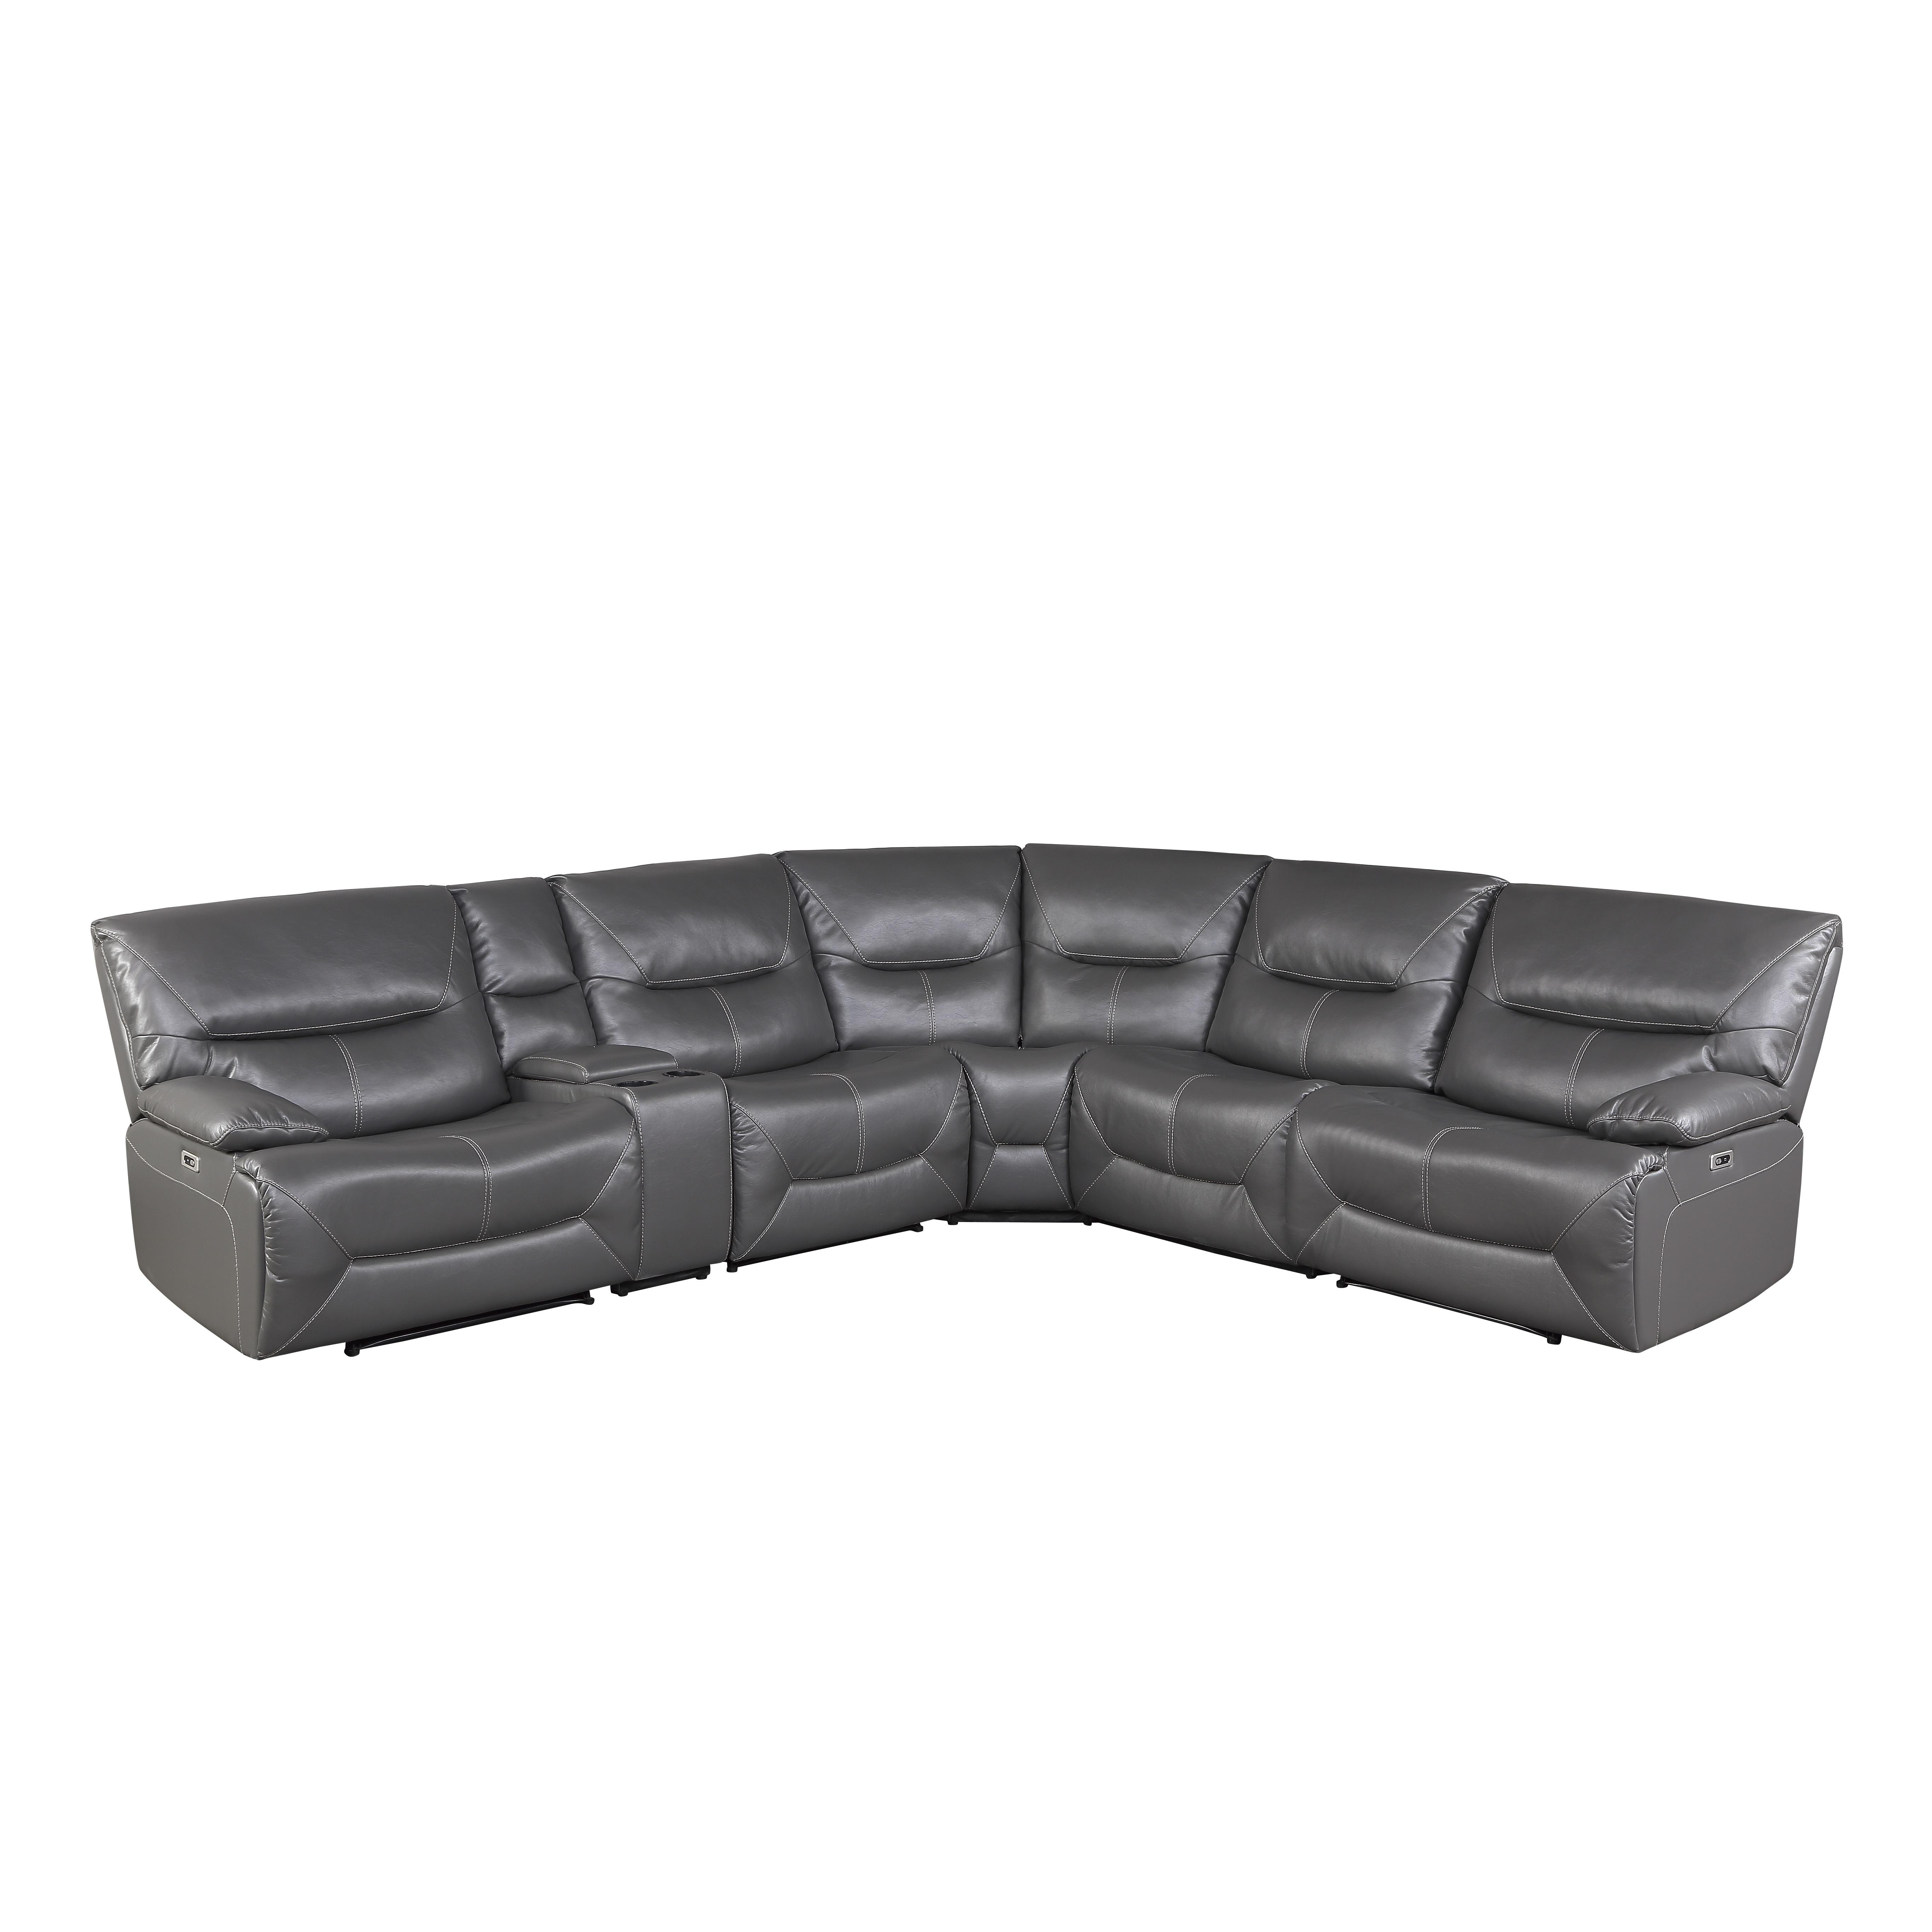 Transitional Power Reclining Sectional 9579GRY*6LRRRPW Dyersburg 9579GRY*6LRRRPW in Gray Faux Leather